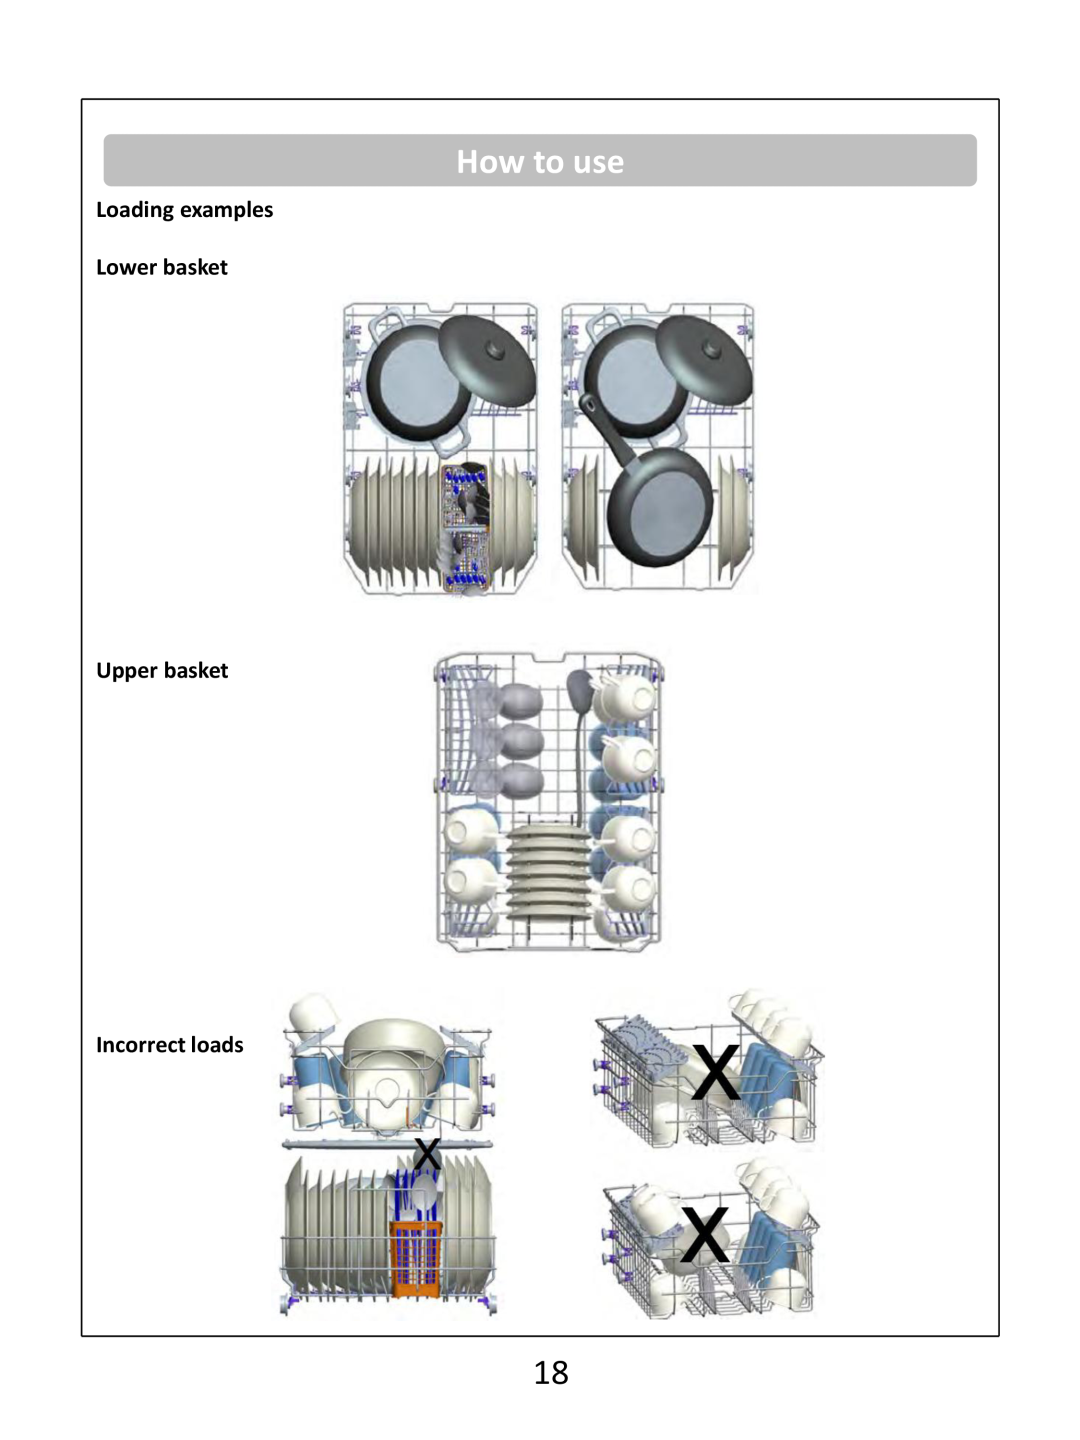 Russell Hobbs RHSLDW1S, RHSLDW1G, RHSLDW1B How to use, Loading examples Lower basket Upper basket, Incorrect loads 